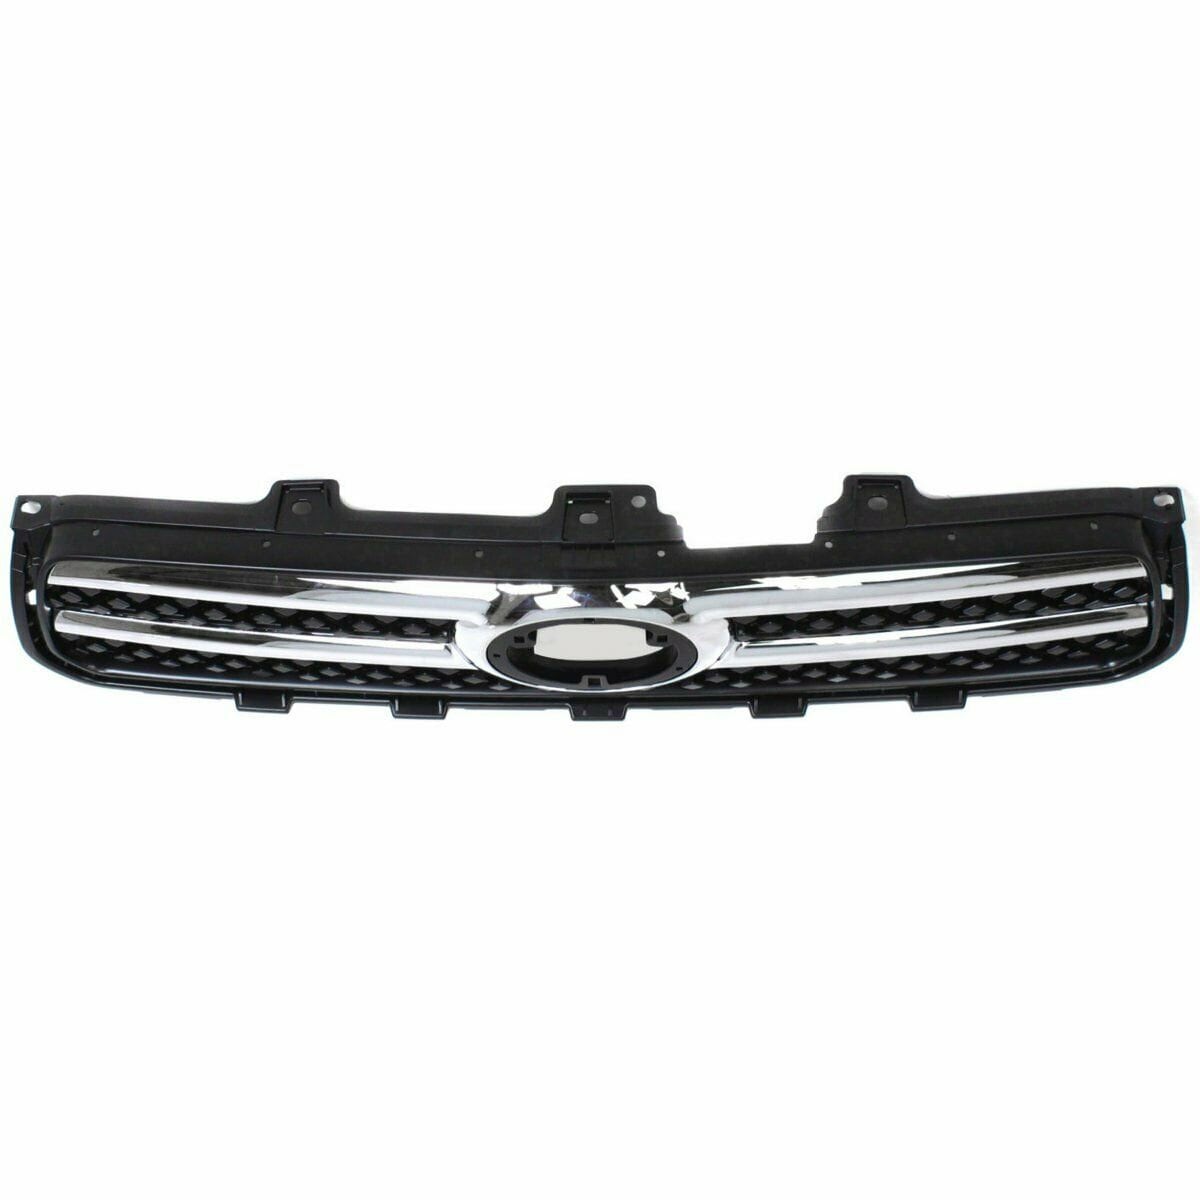 NEW FRONT GRILLE BLACK SHELL AND INSERT FITS 2006-2008 TOYOTA RAV4 TO1200292